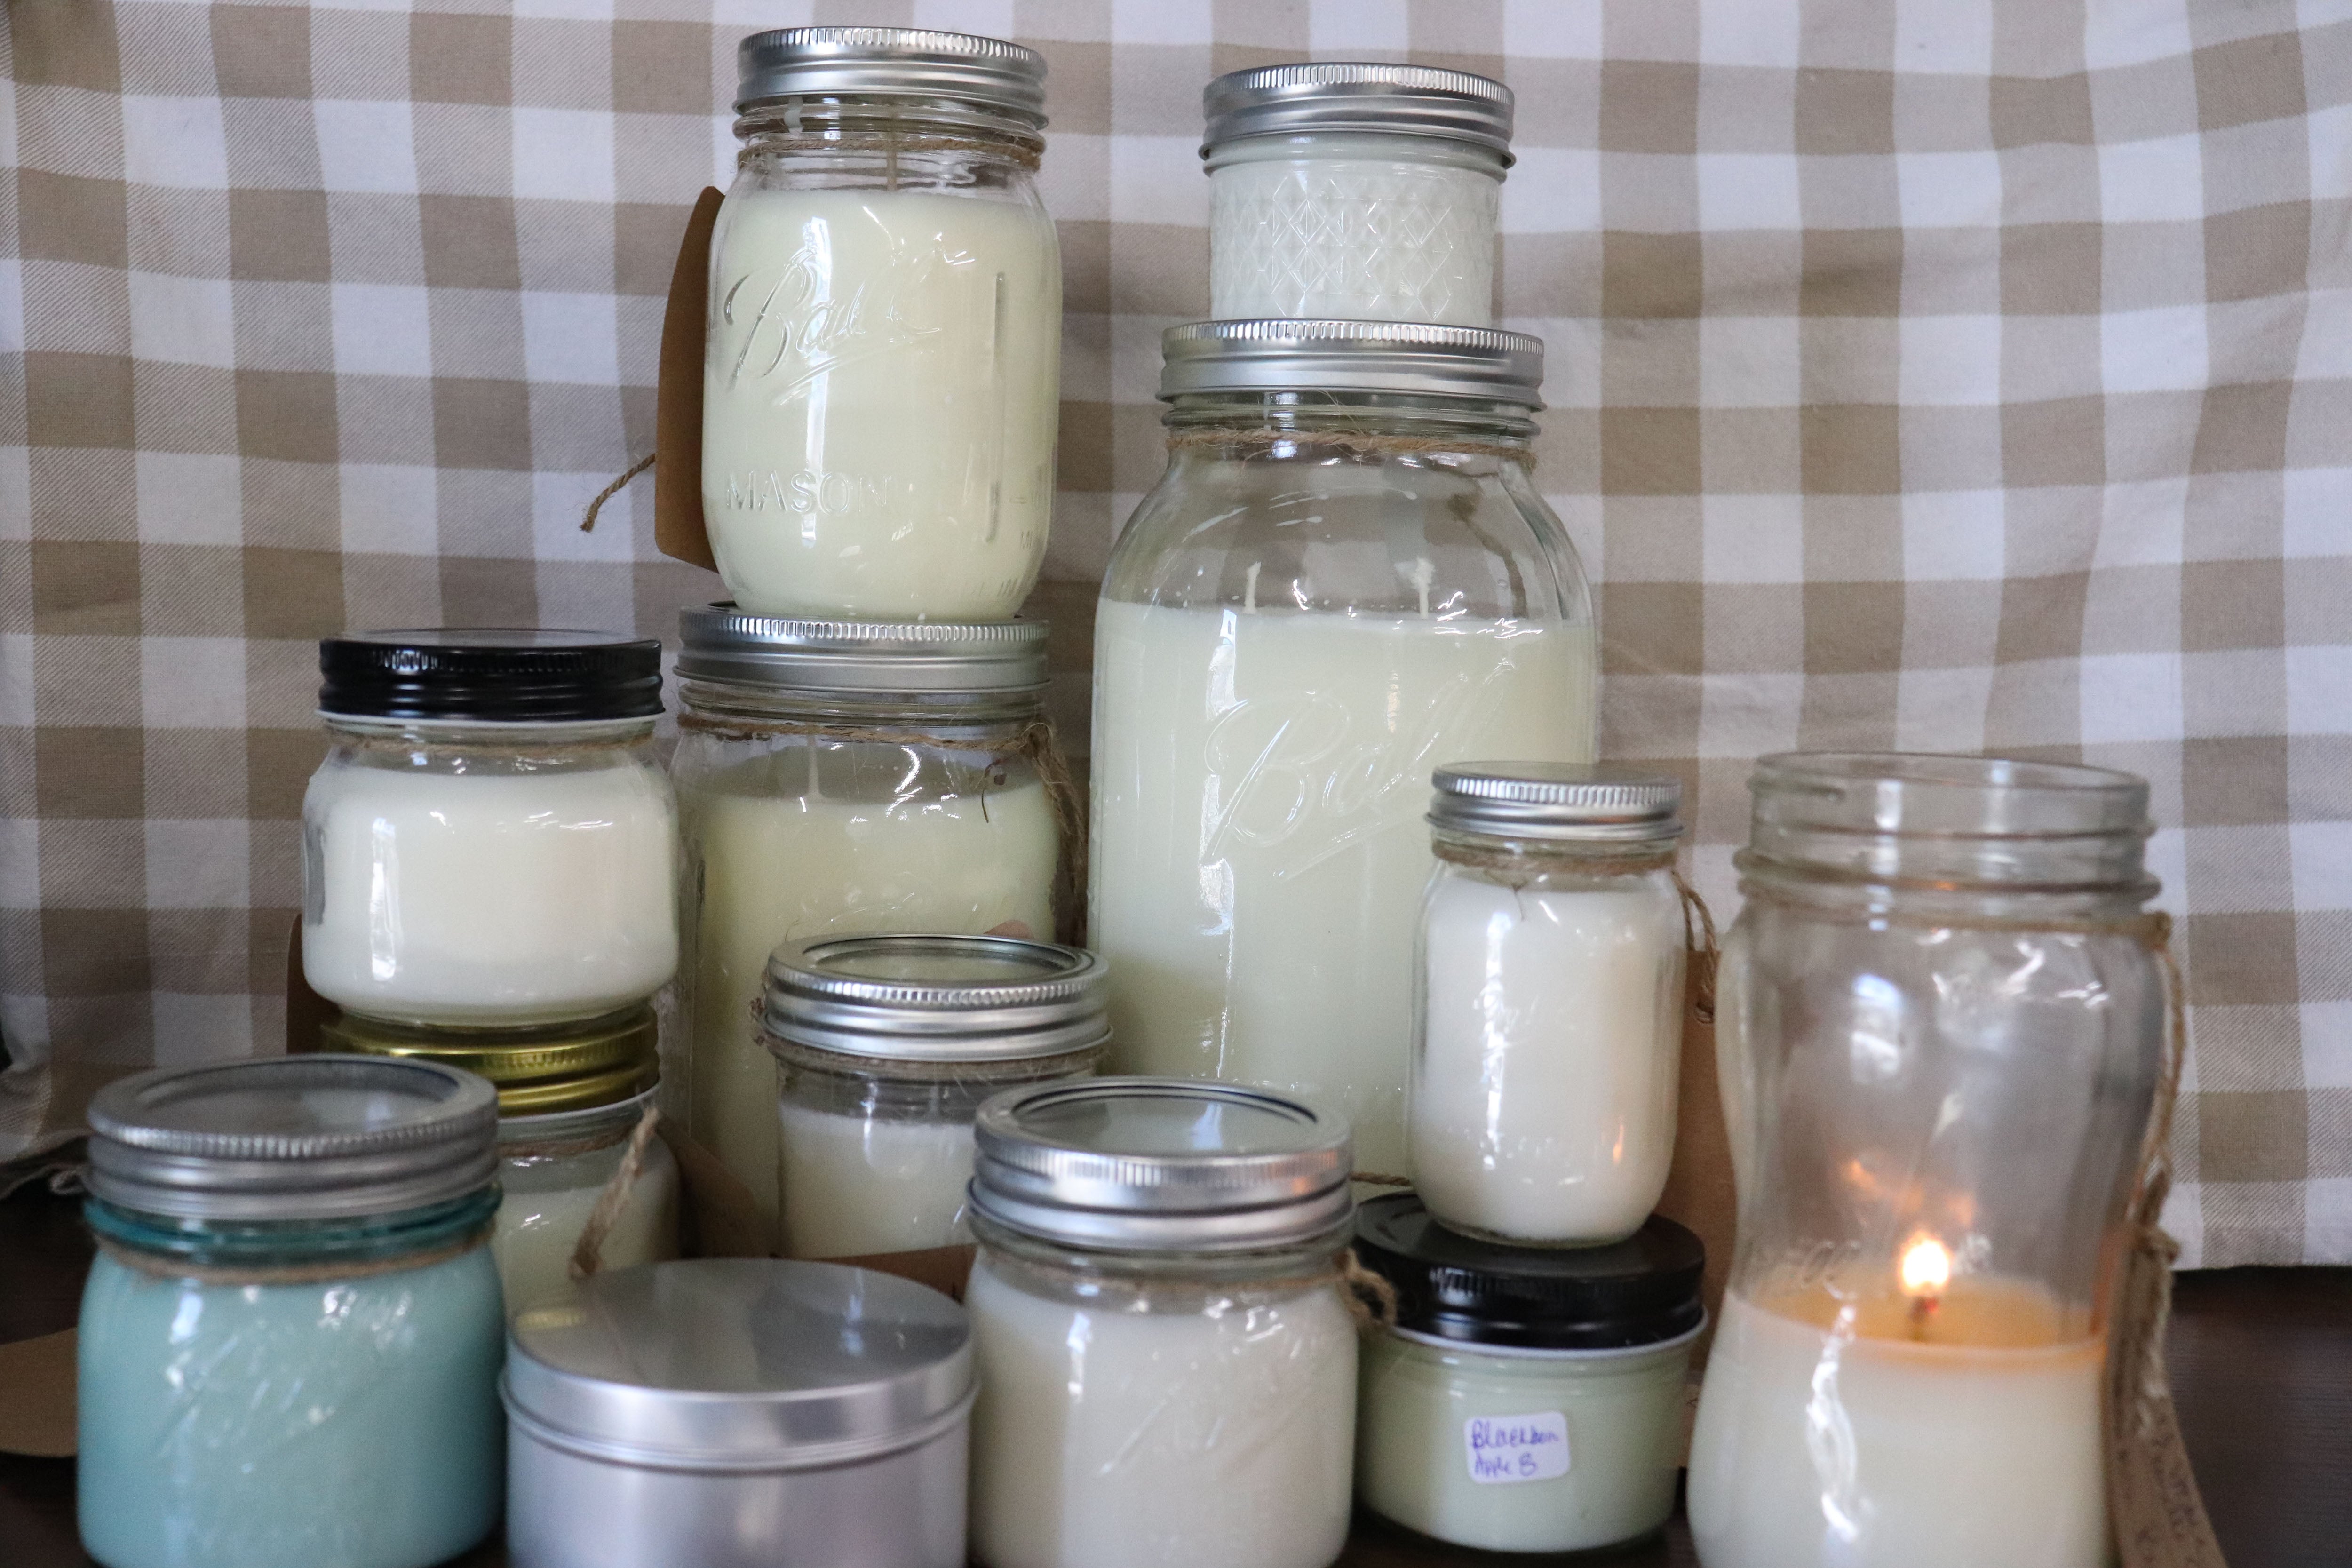 Scents of Home Custom Soy Candles